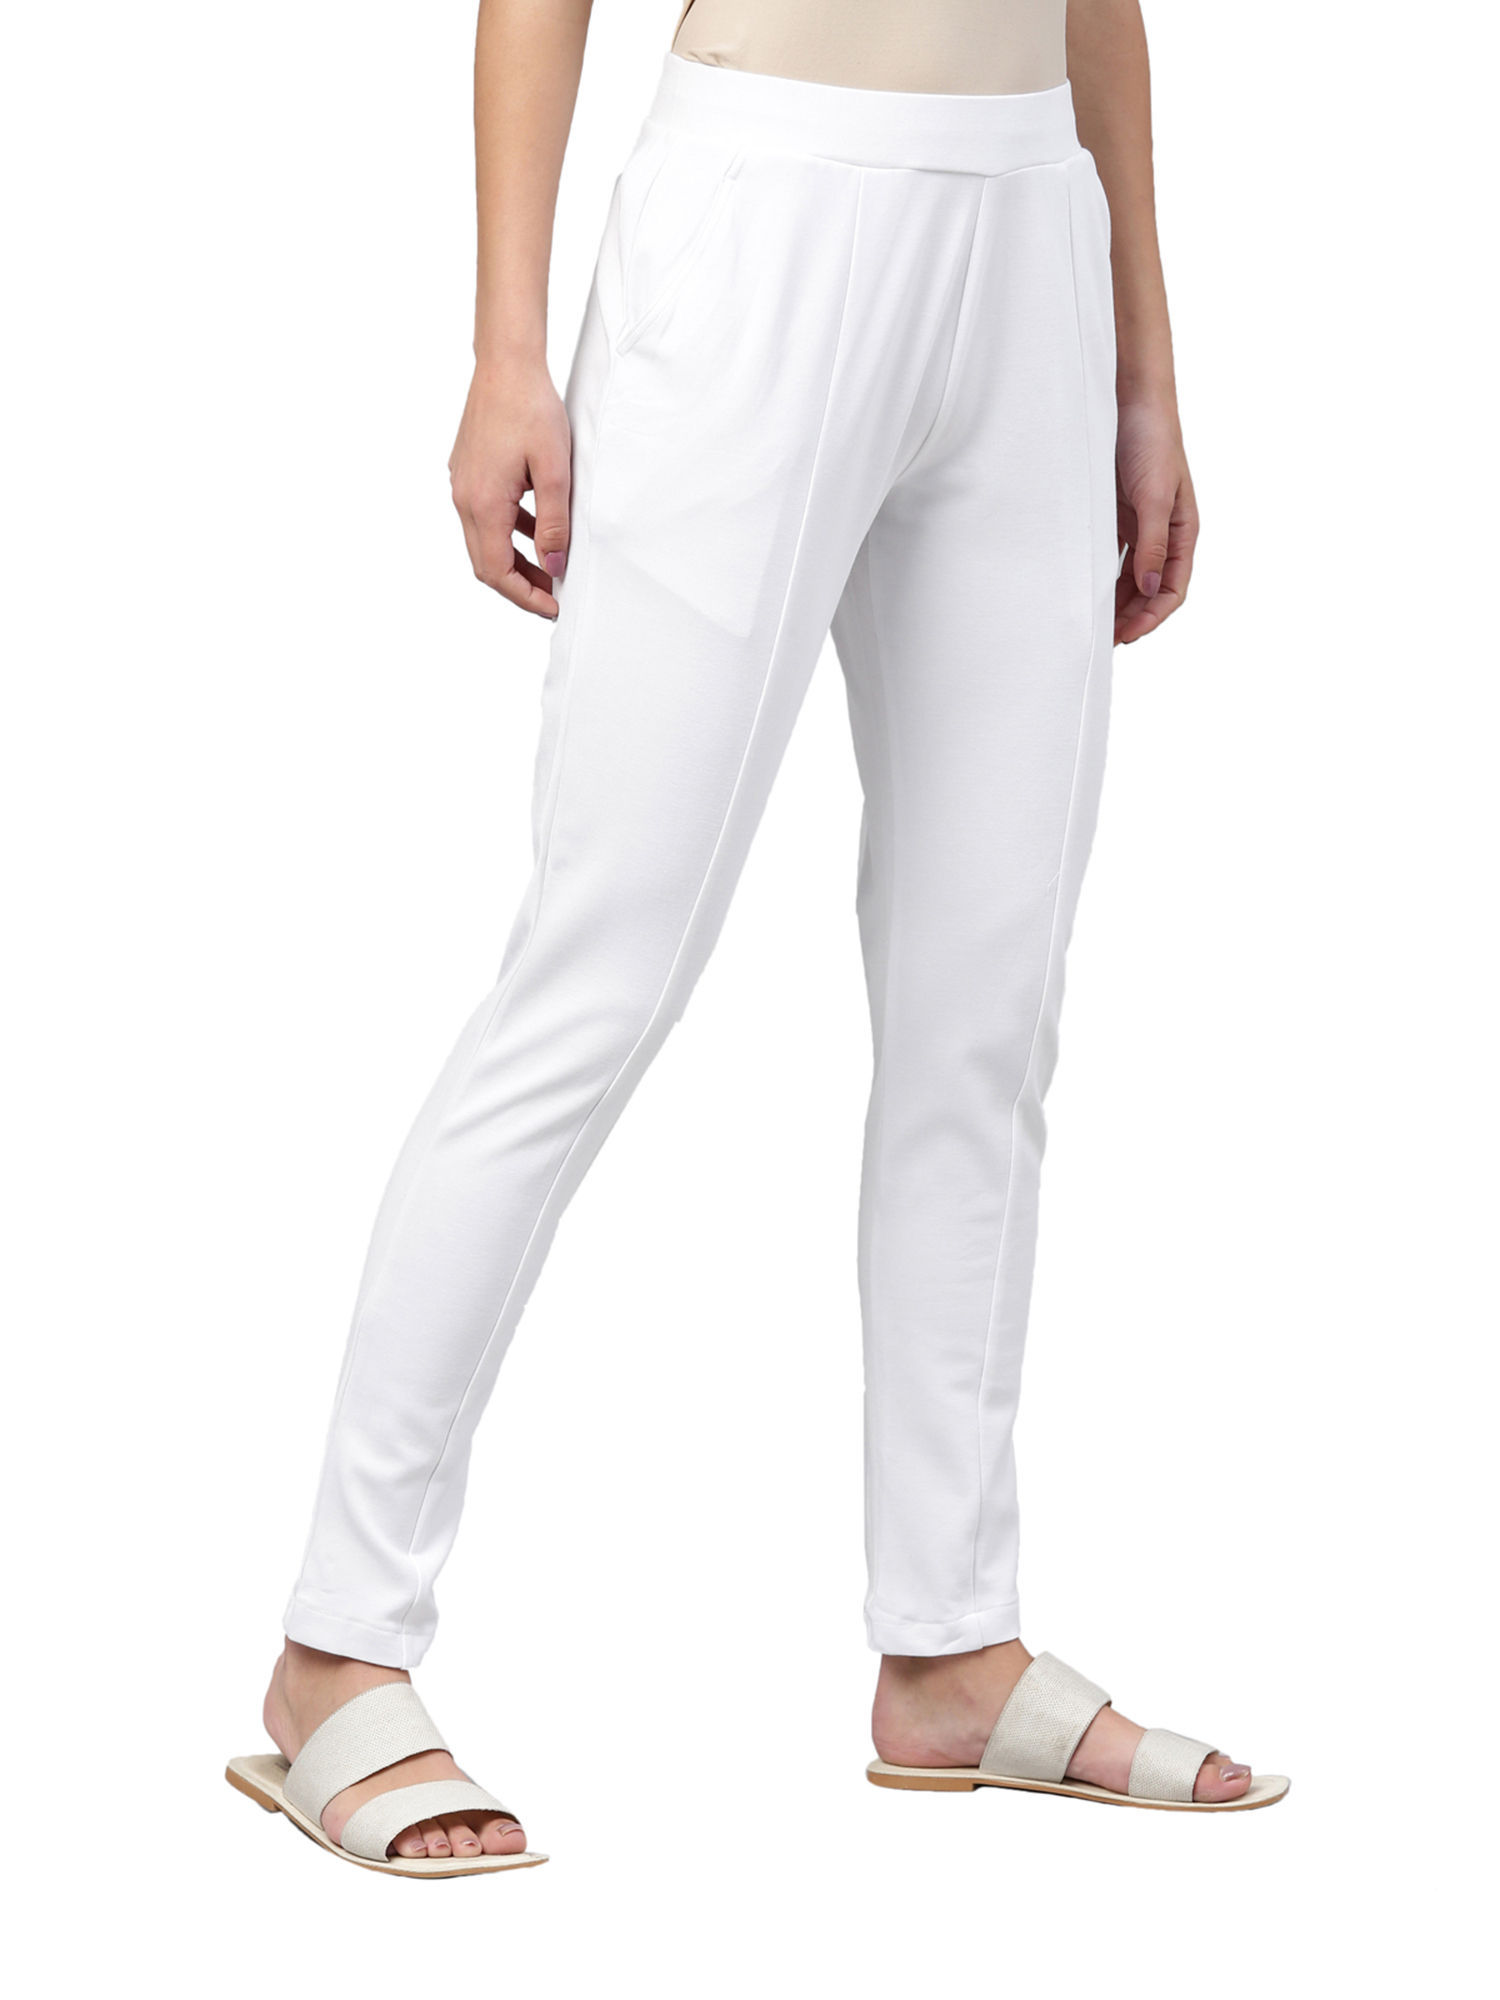 LASTINCH White Comfort Fit Stretch Pants  Sizes up to 8XL